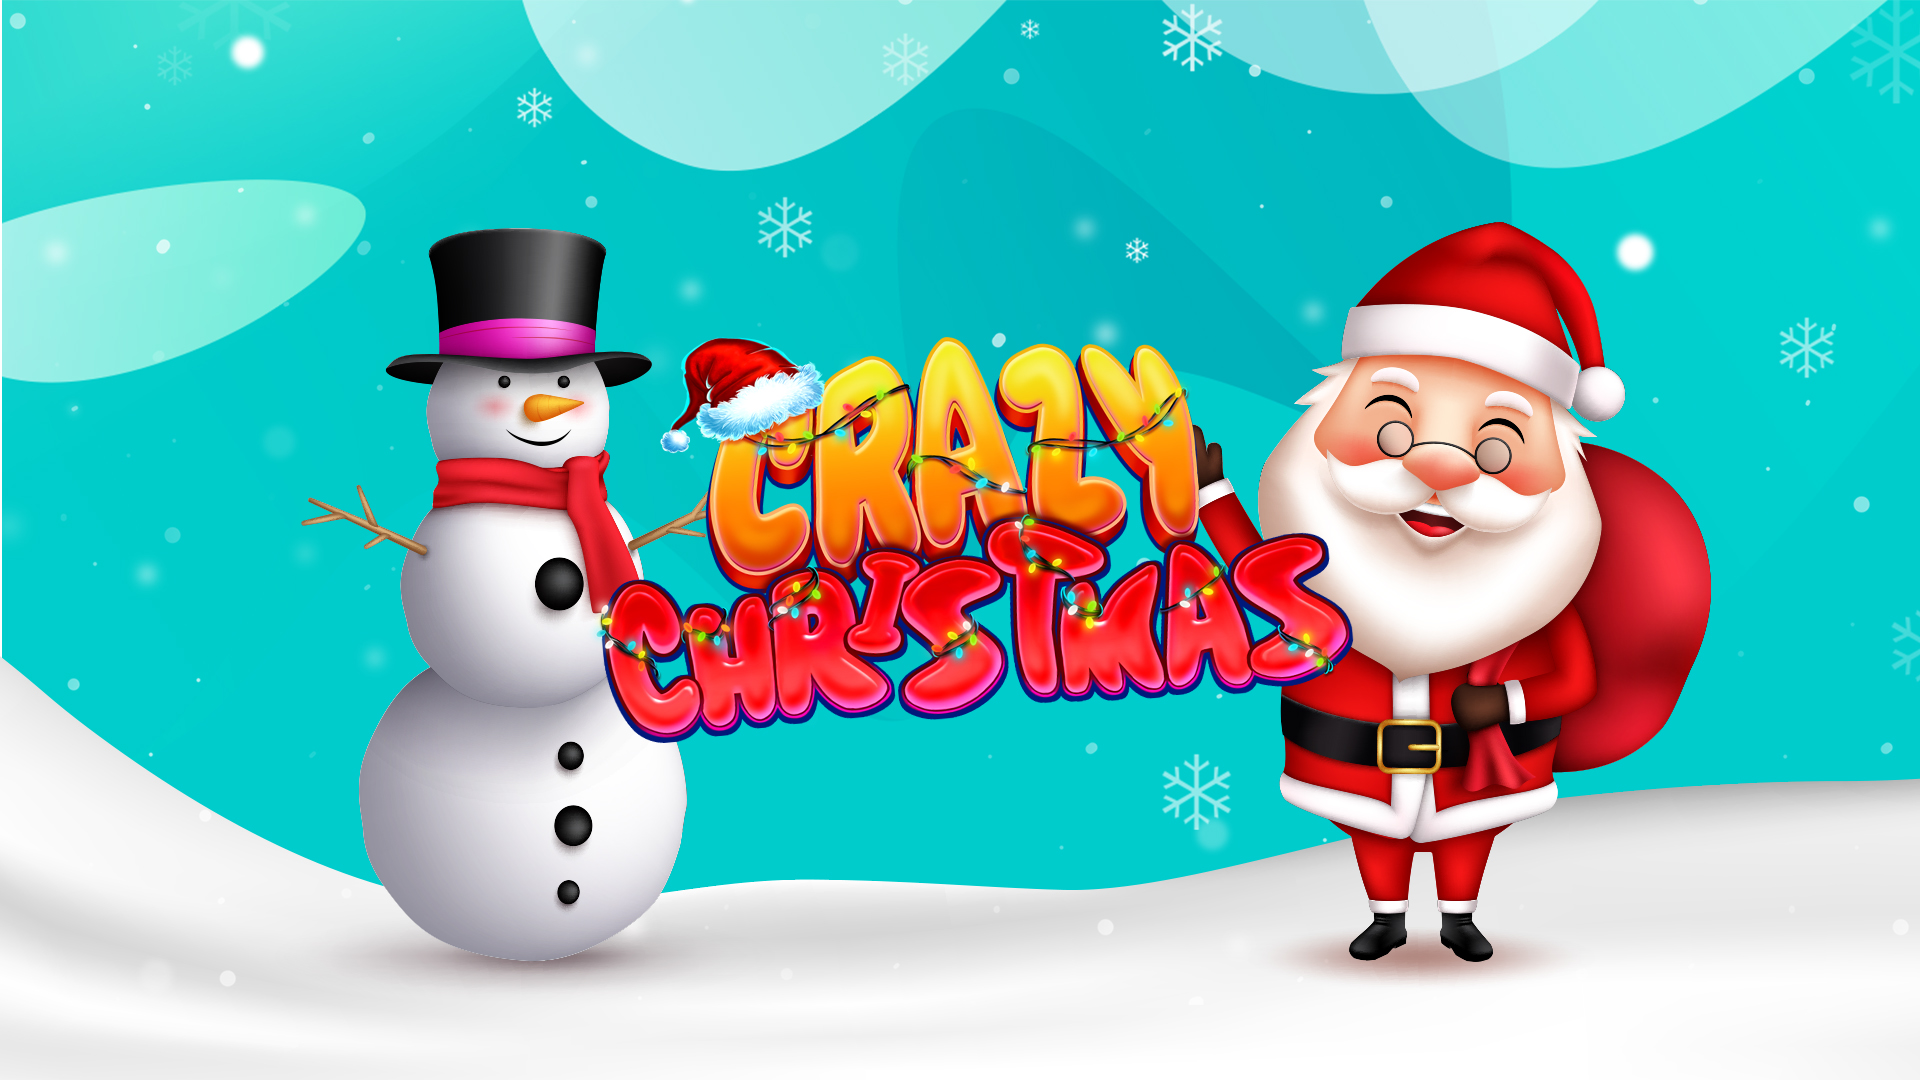 Front and center in the image are the words “Crazy Christmas”, the logo from the SlotsLV slot game of the same name, with a 3D-animated Santa standing to the right, and a 3D-animated snowman to the left.